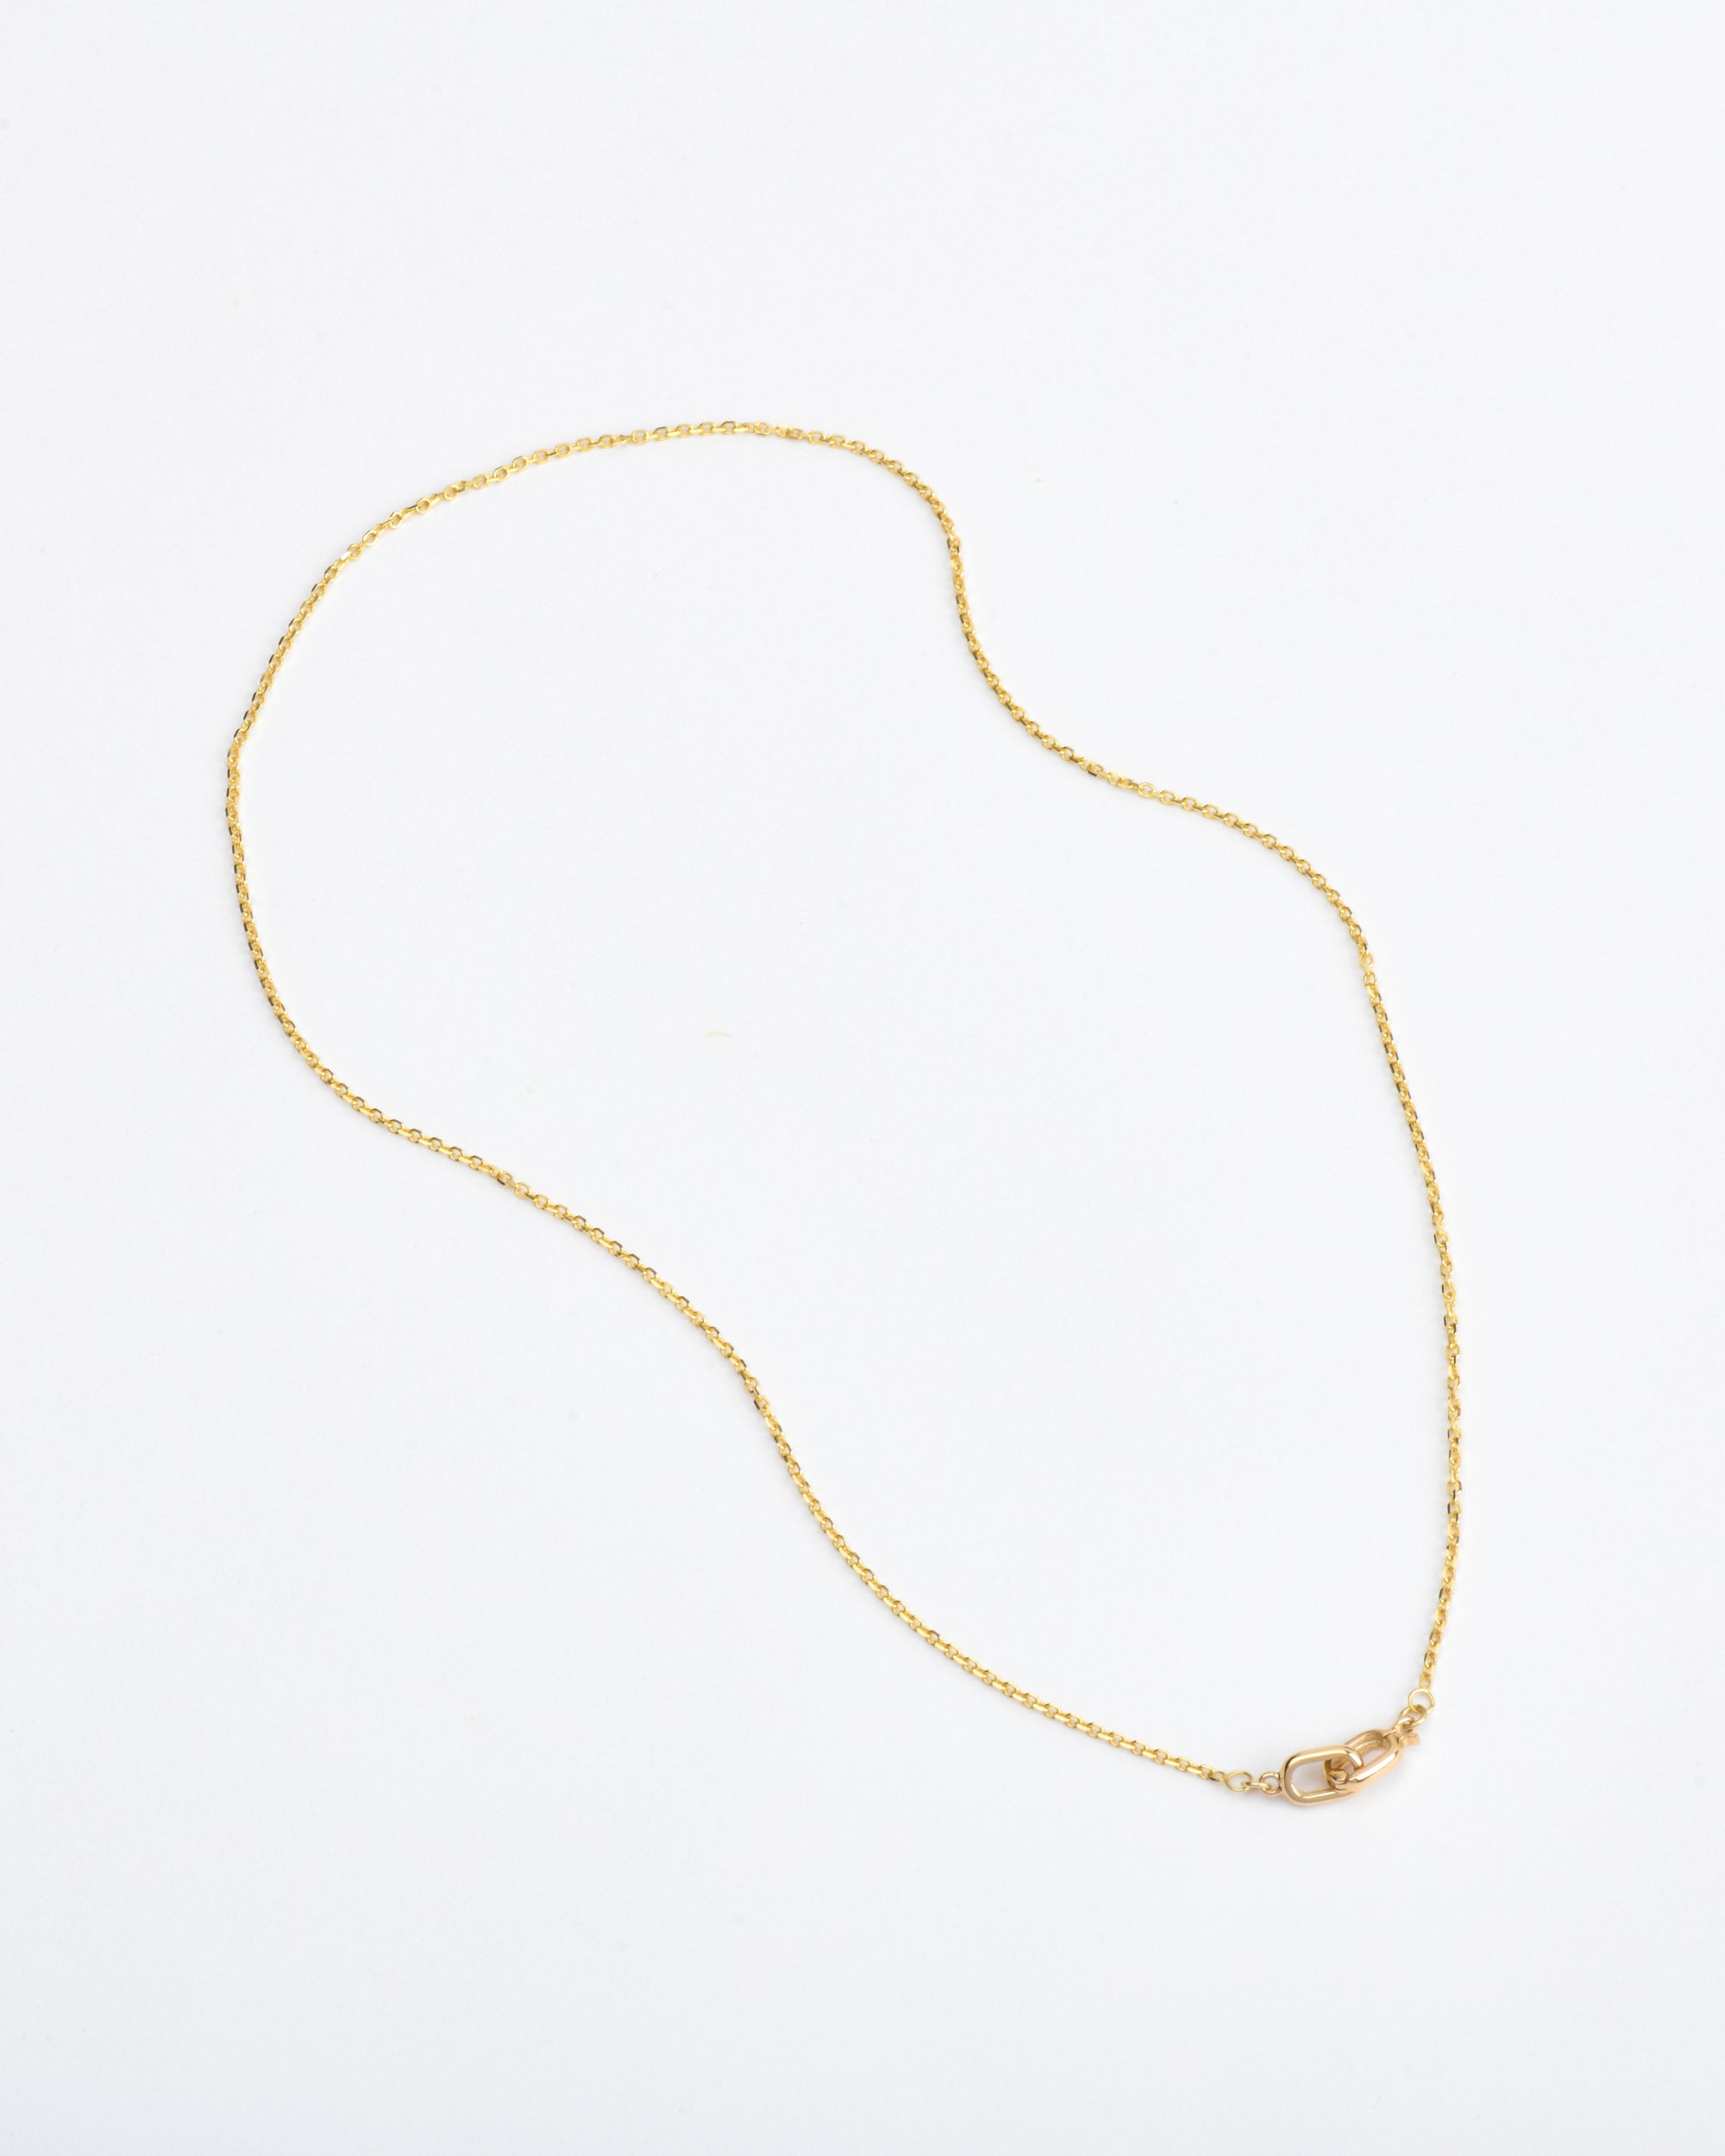 dainty 14k gold chain necklace on white background 